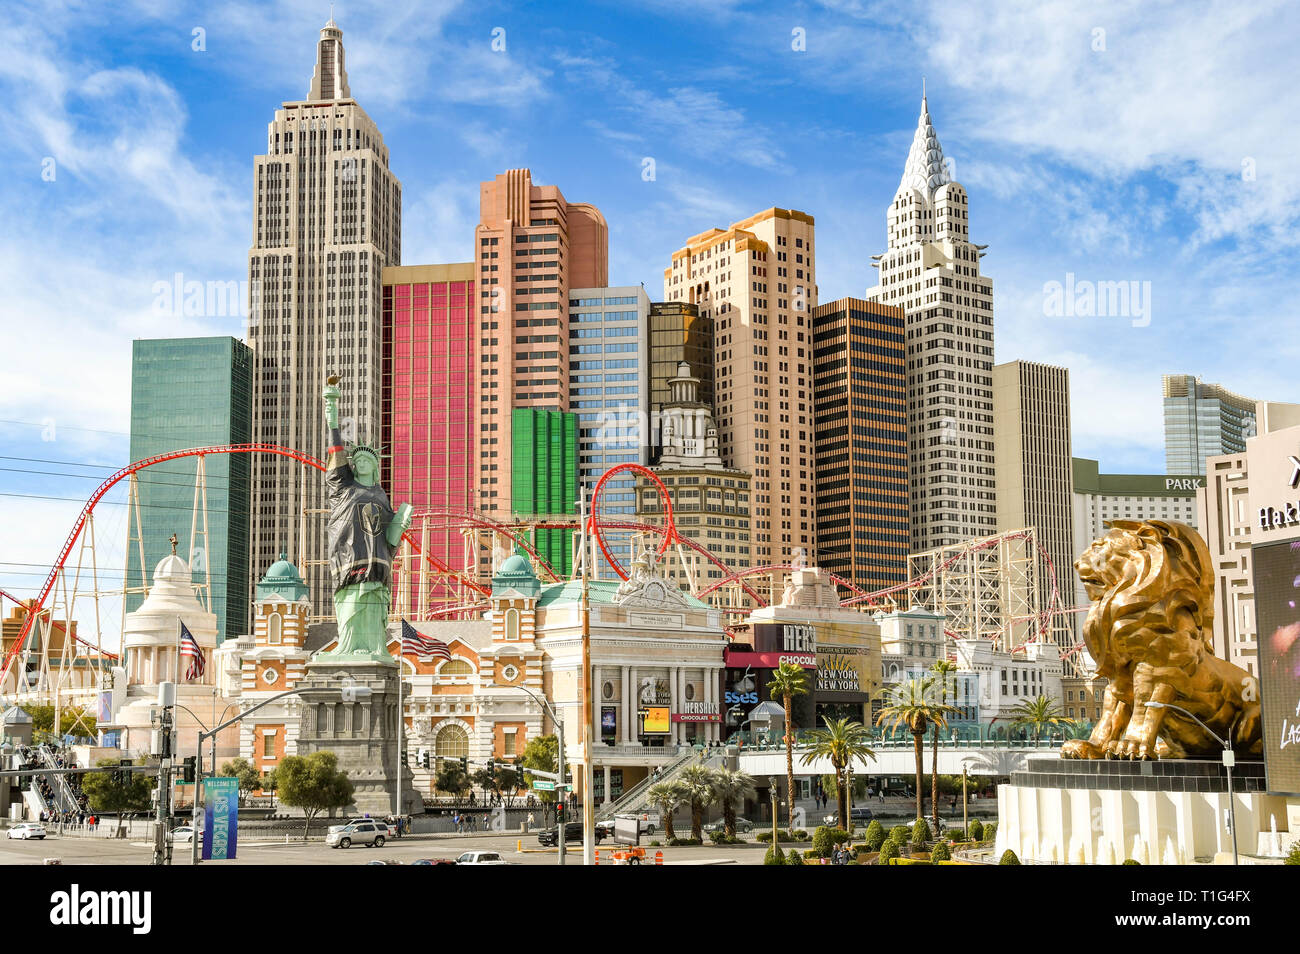 LAS VEGAS, NV, USA - FEBRUARY 2019: Wide angle view of the New York New York Hotel in Las Vegas. On the right is a large statue of a lion outside the  Stock Photo